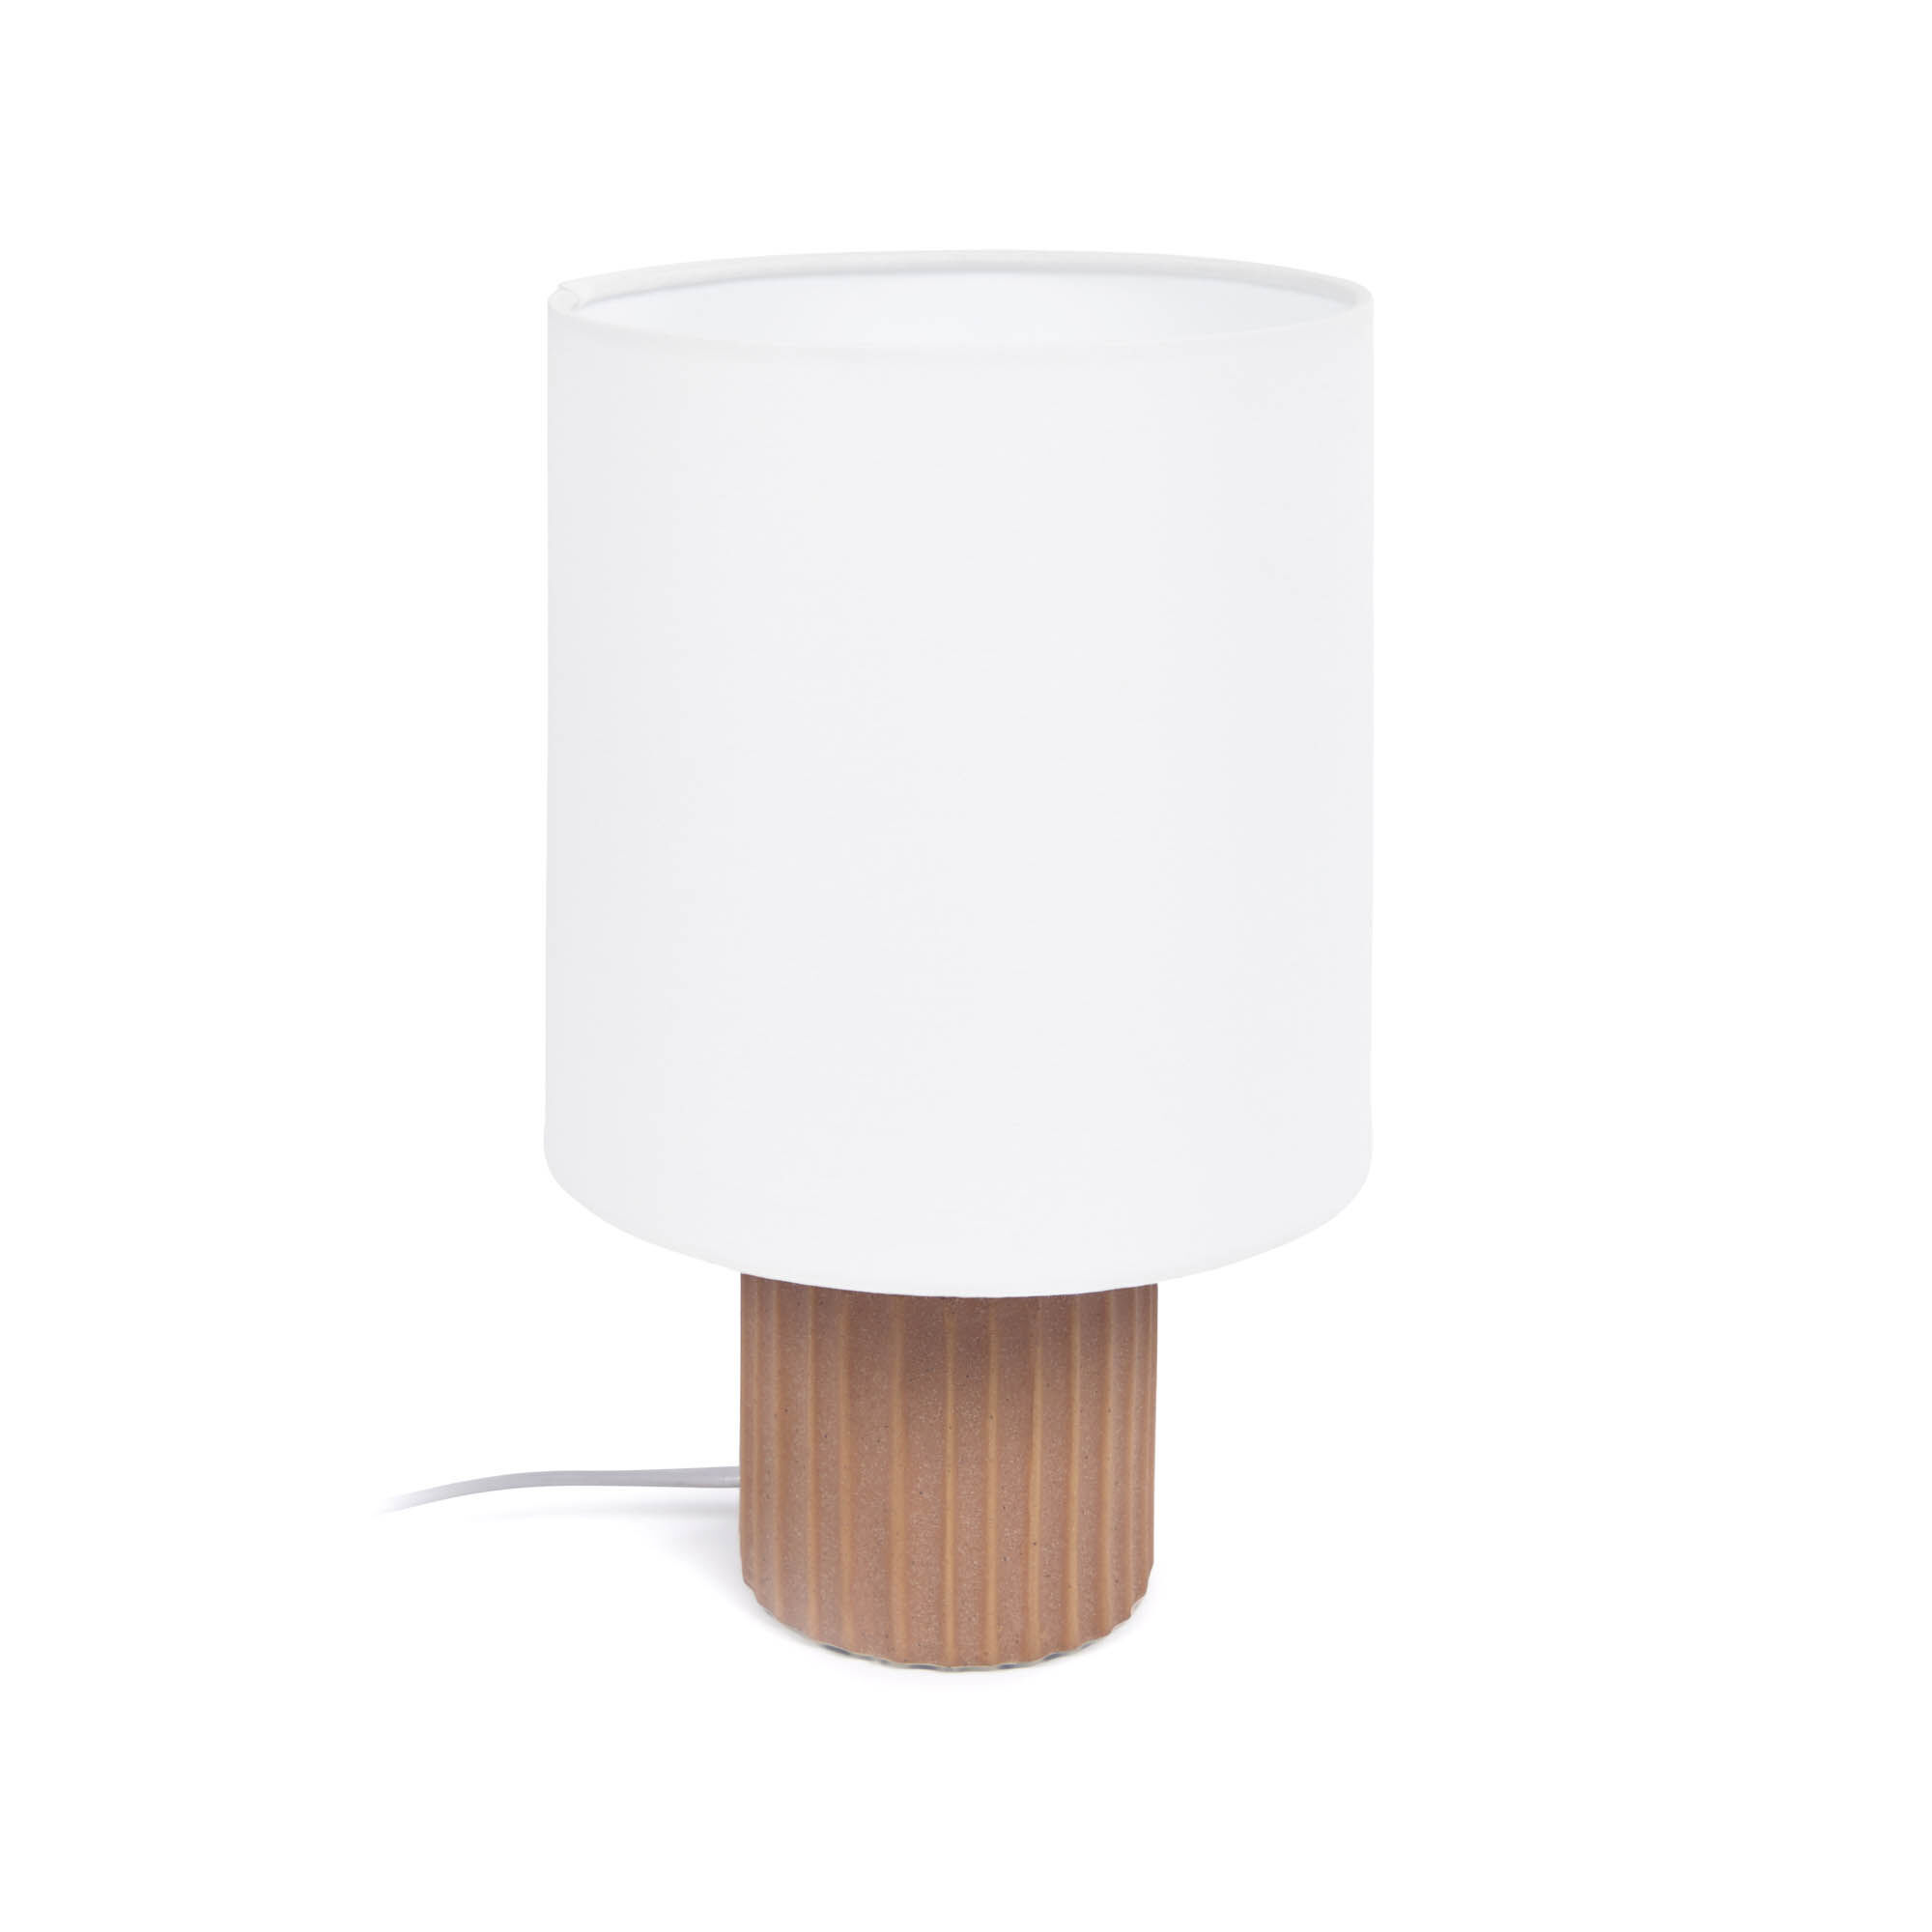 Kave Home Eshe ceramic table lamp with terracotta and white finish